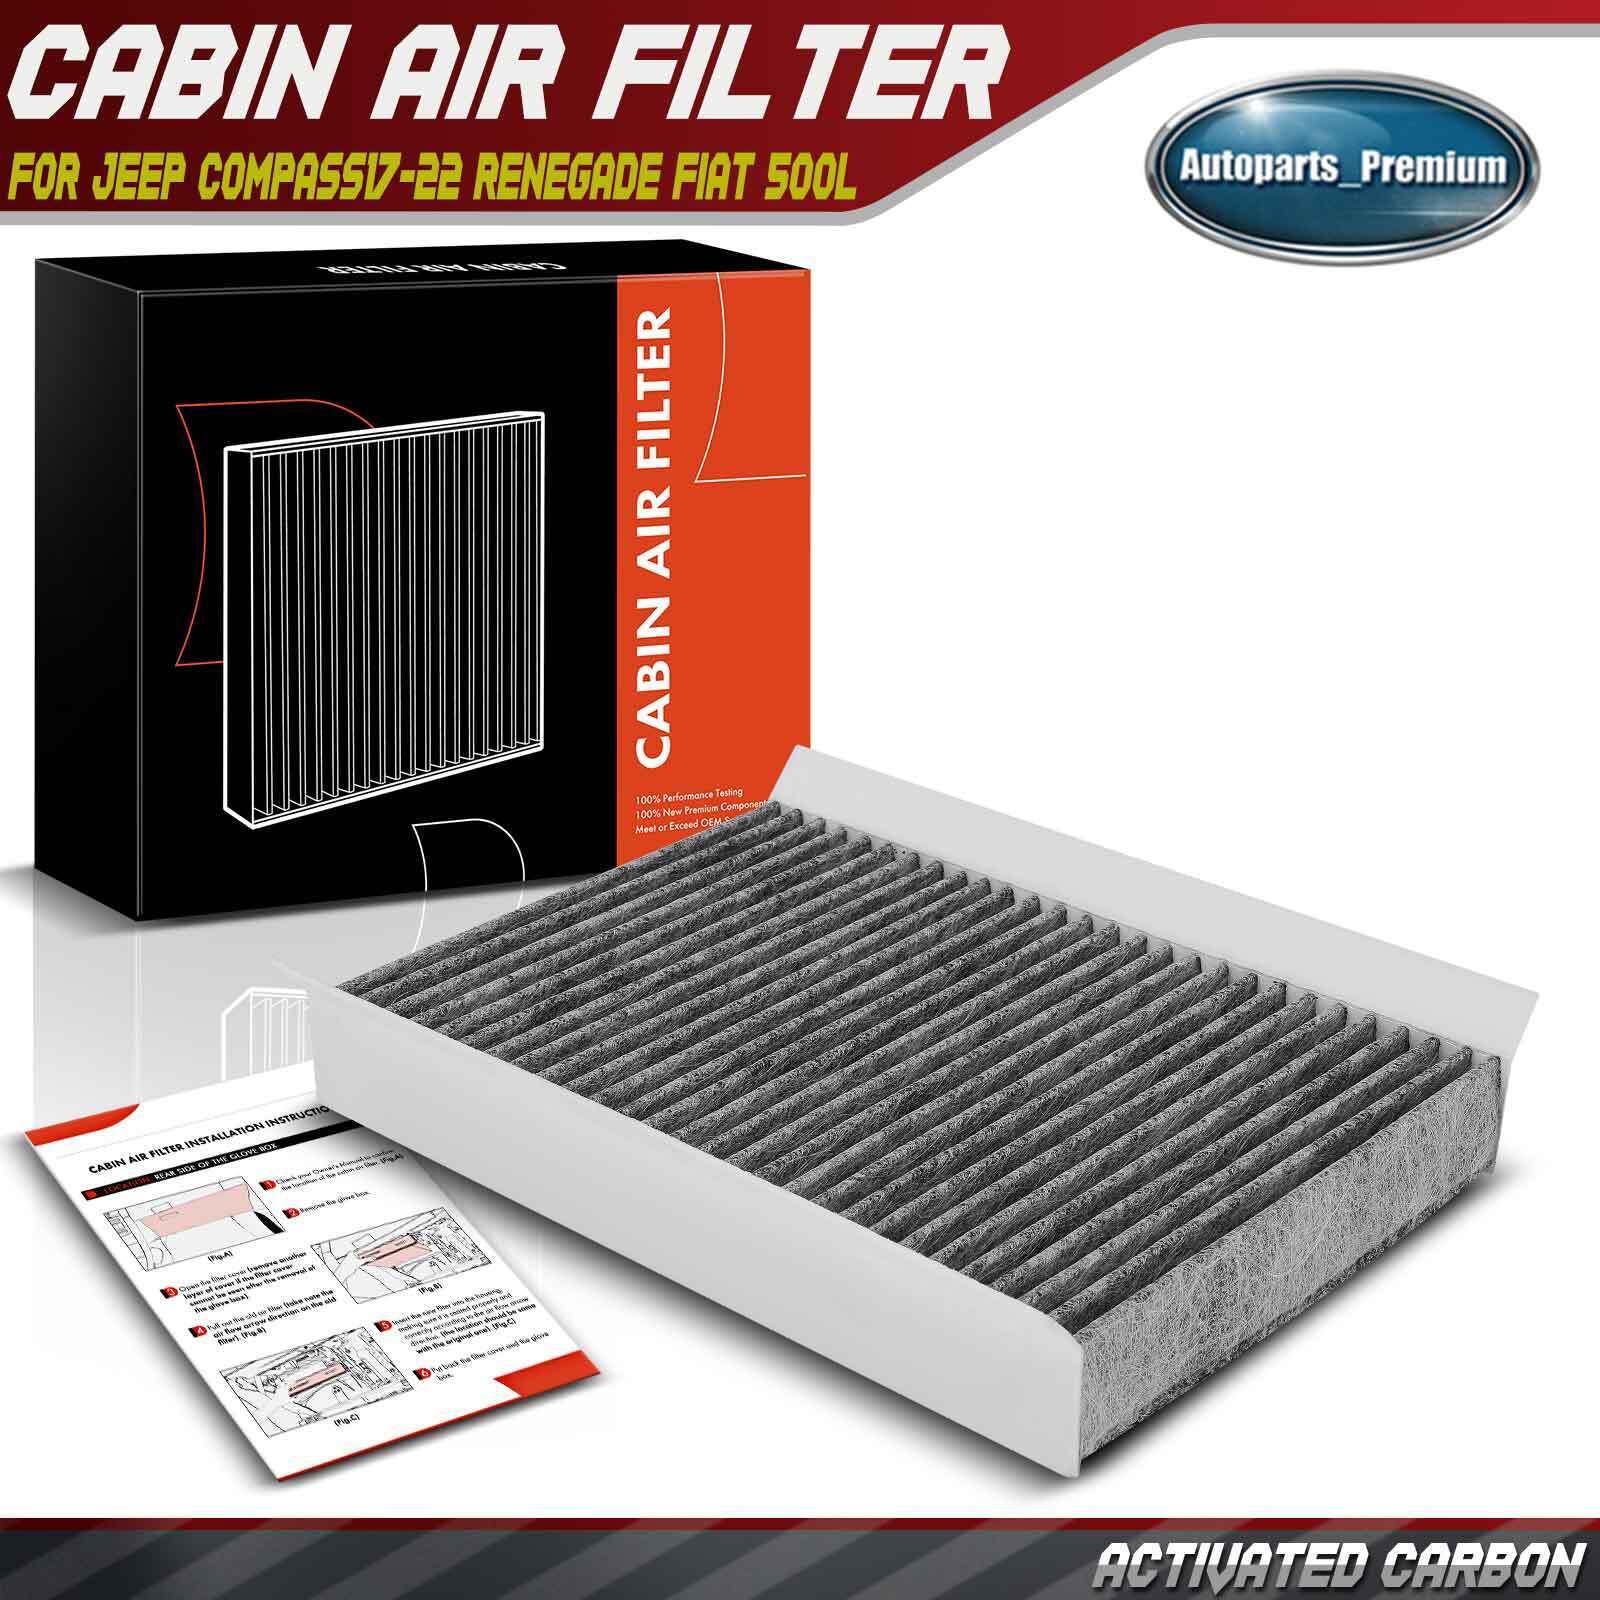 Activated Carbon Cabin Air Filter for Jeep Compass17-22 Renegade Fiat 500L 500X